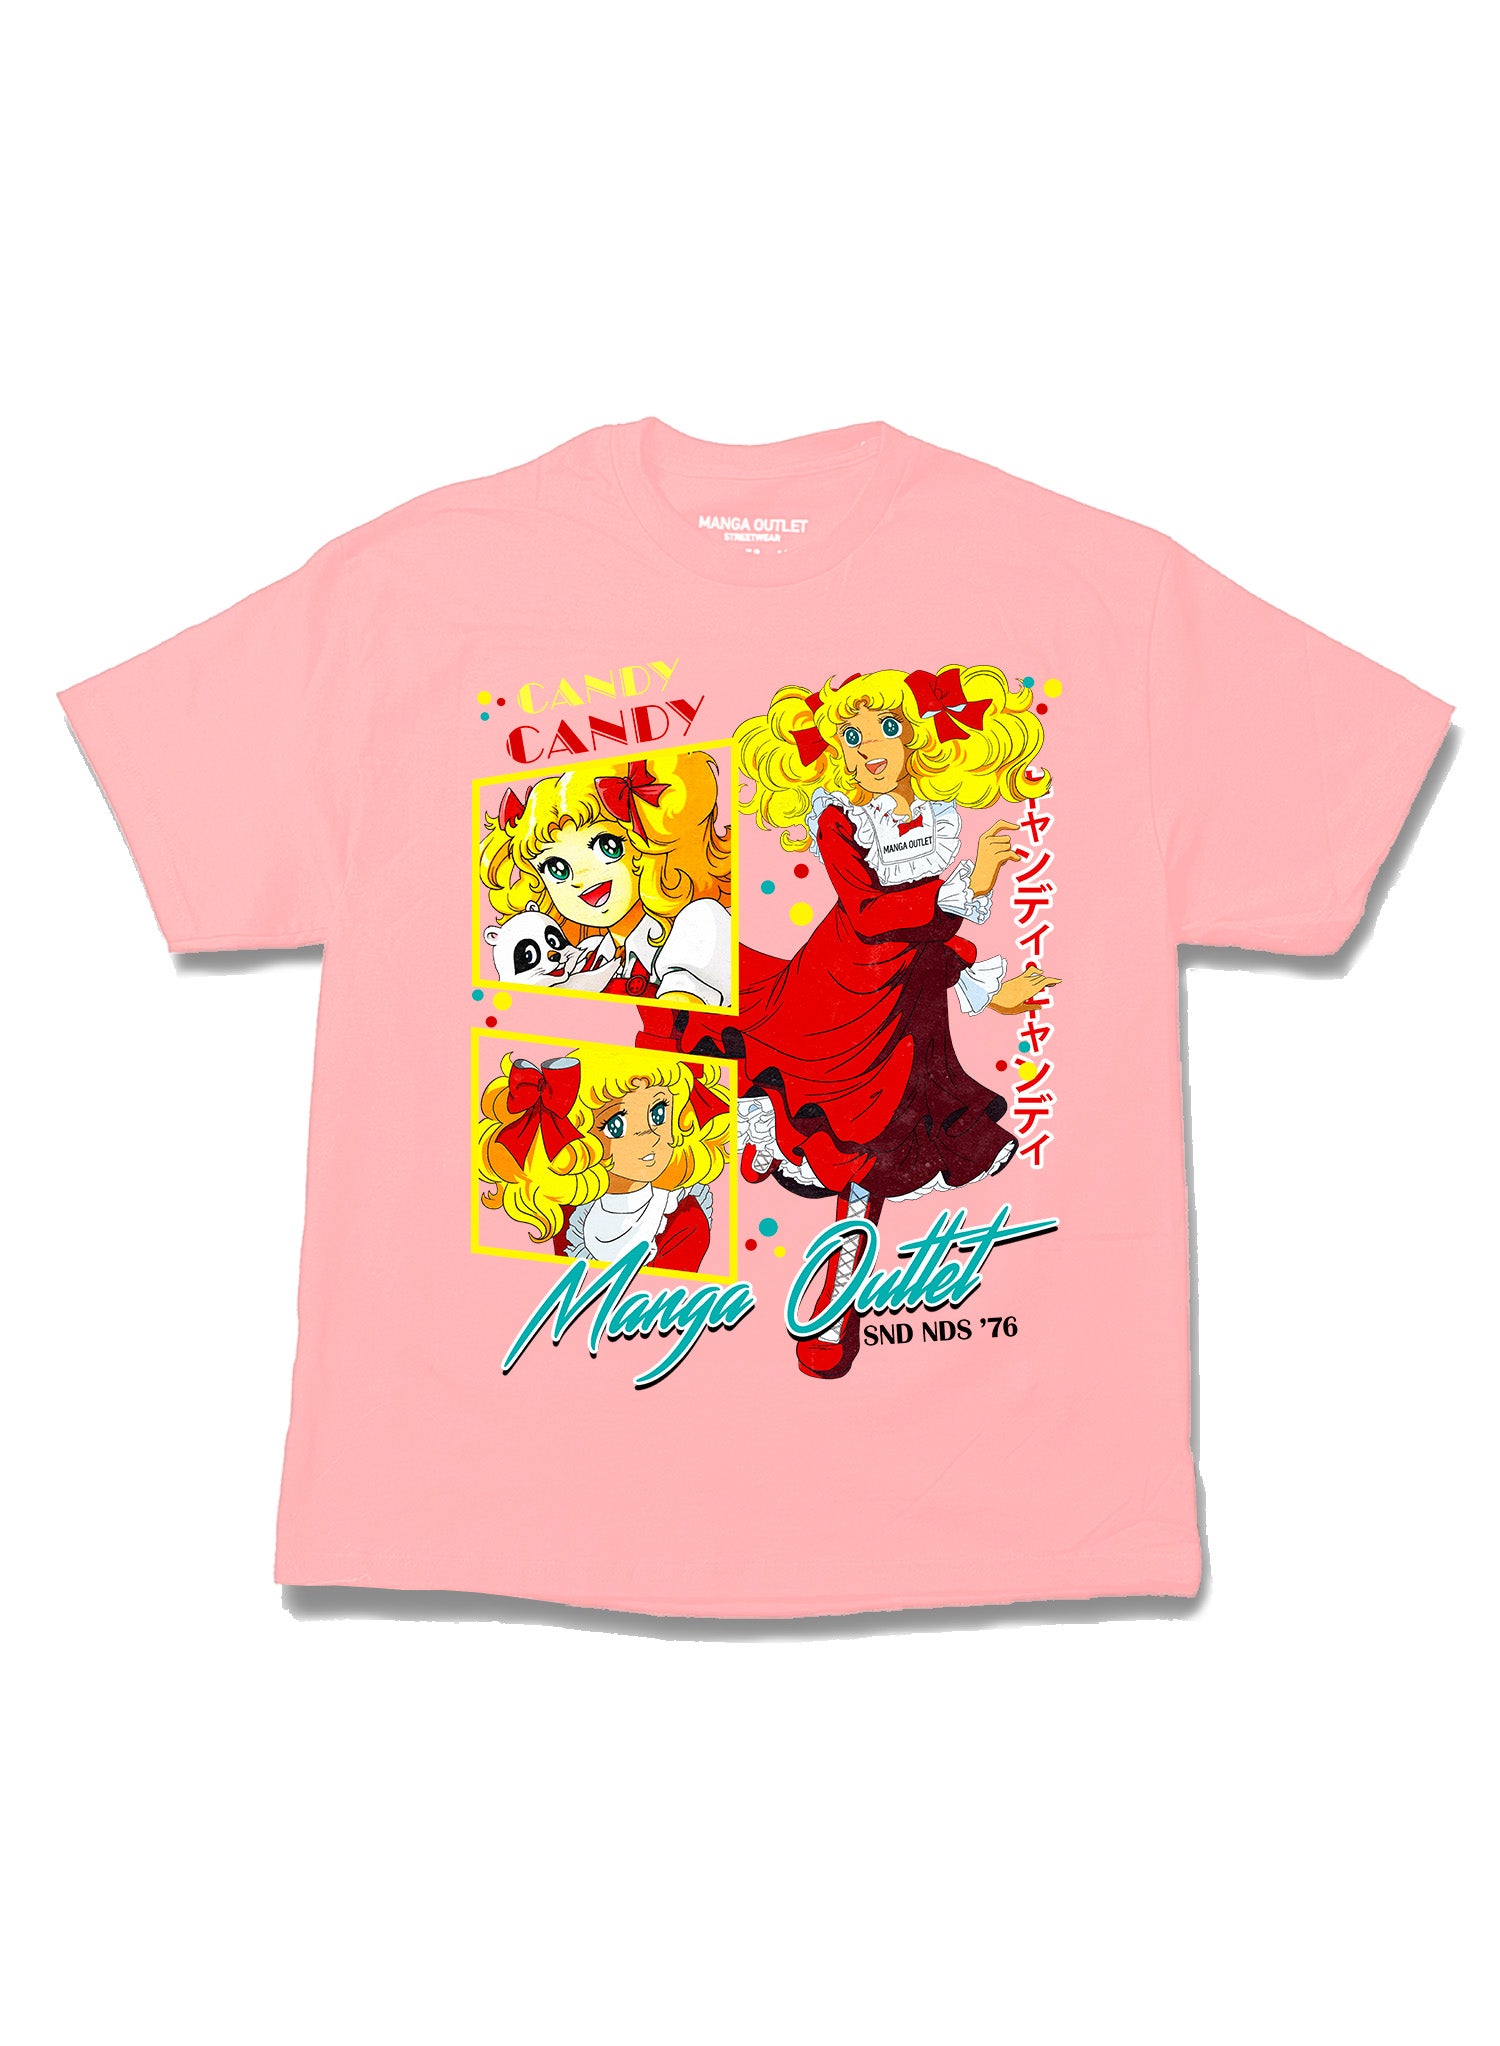 Candy Candy Retro Tee